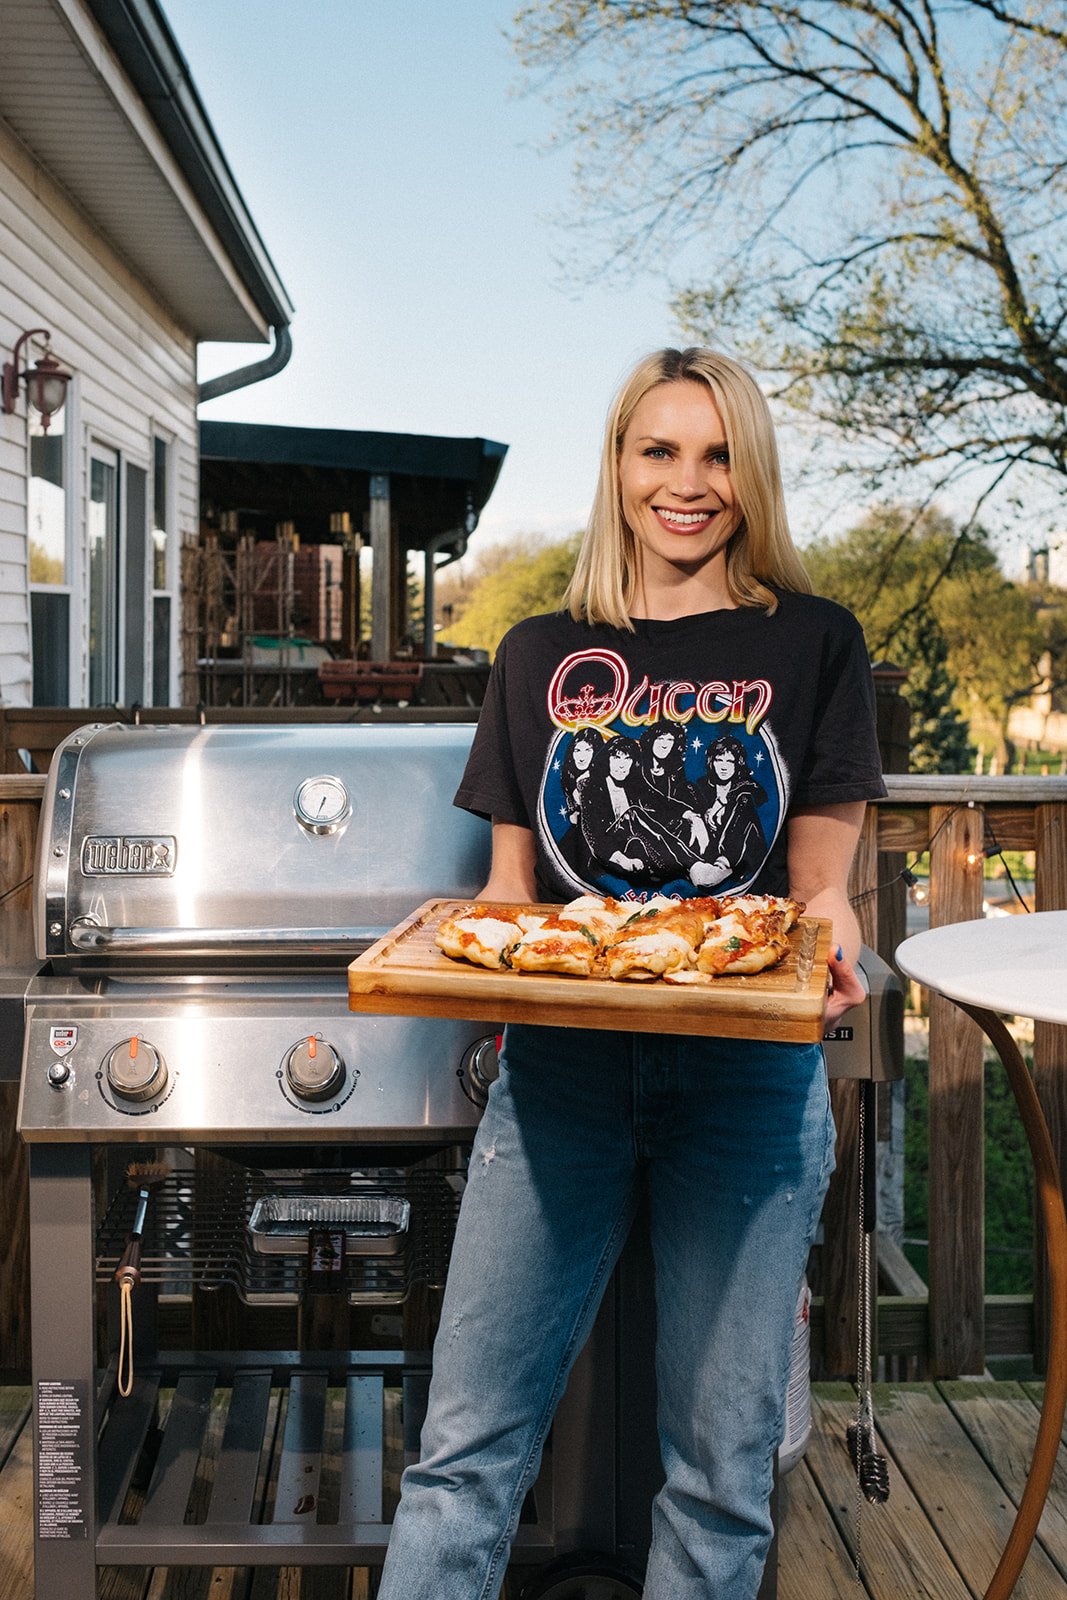 blonde woman holding a grilled pizza in front of a grill